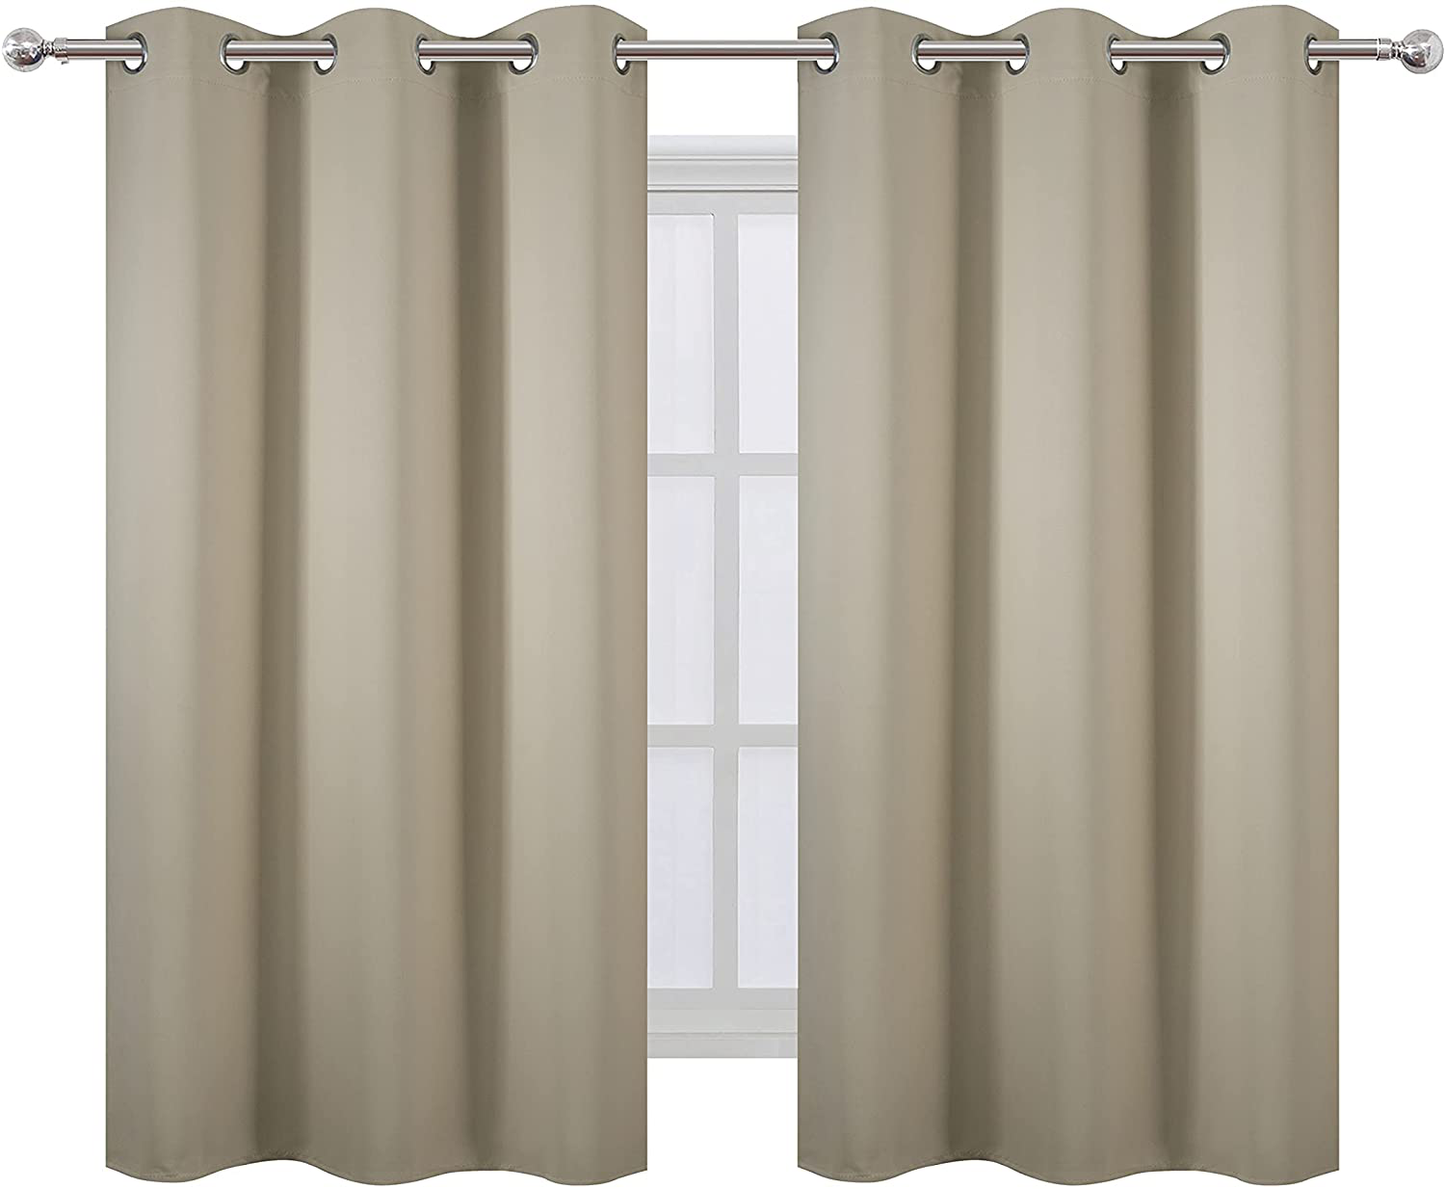 LEMOMO Burgundy Red Thermal Blackout Curtains/52 x 54 Inch/Set of 2 Panels Room Darkening Curtains for Bedroom